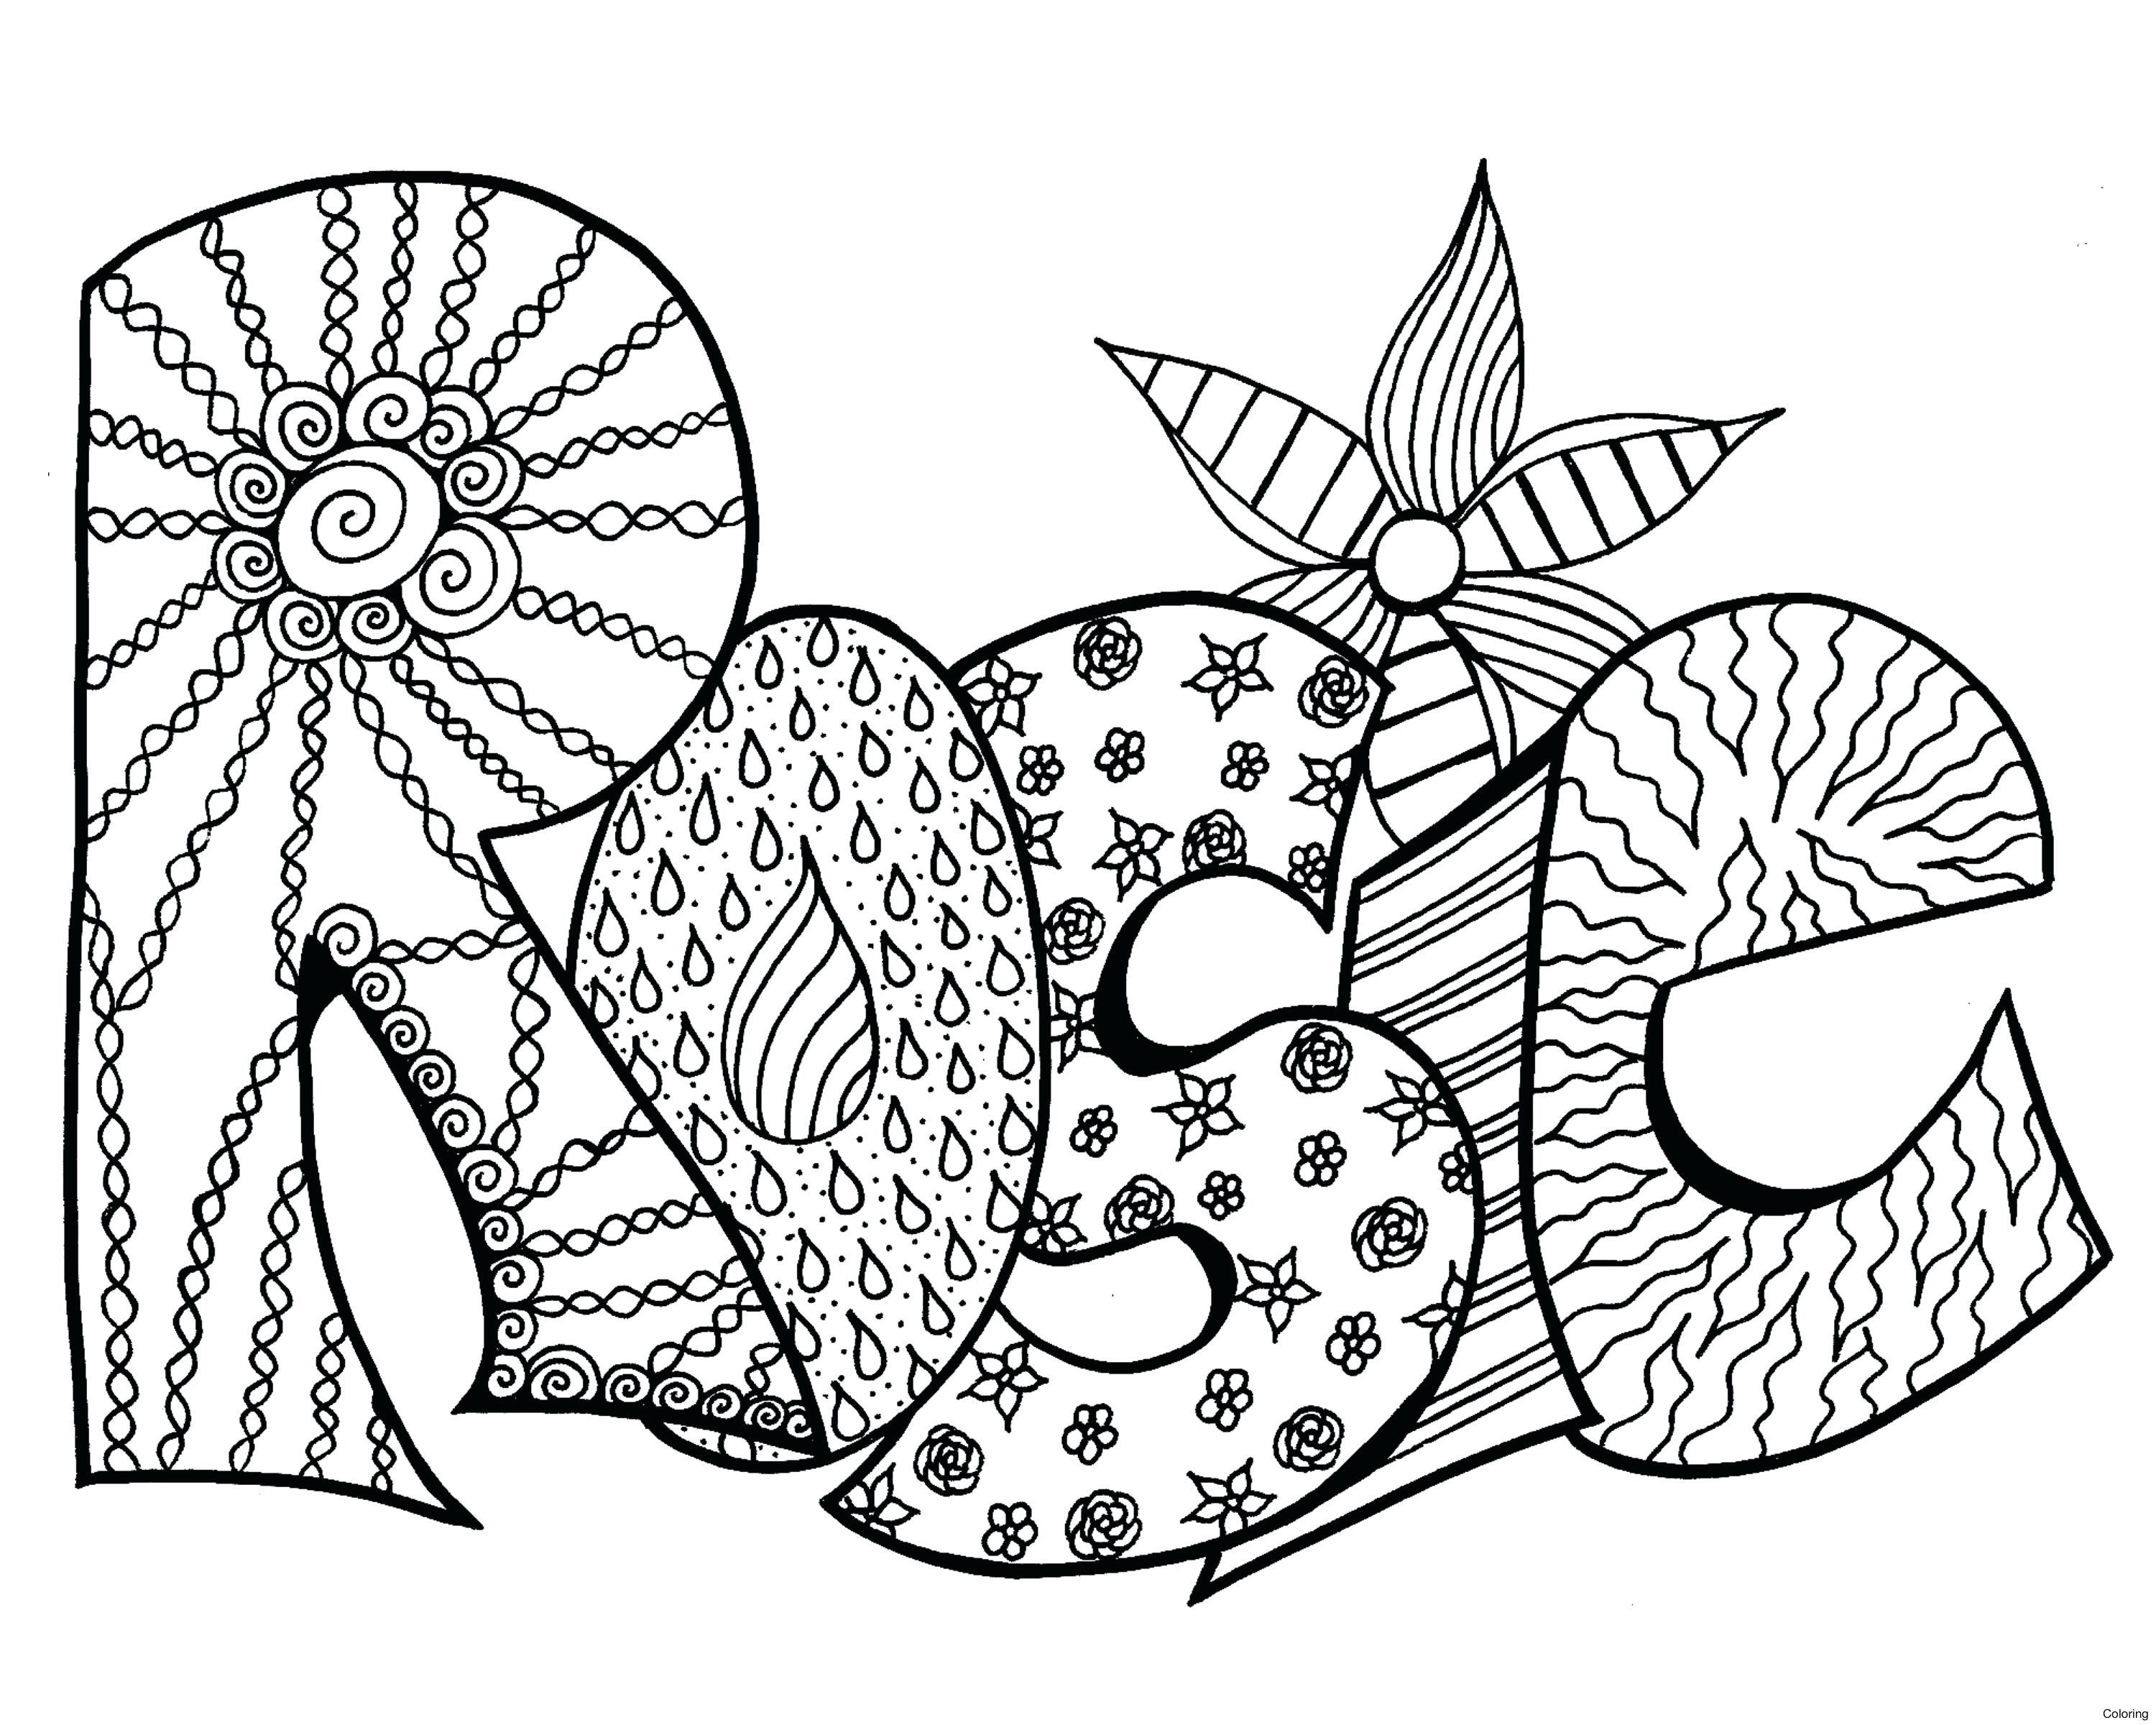 Personalized Coloring Pages Coloring Pages Phenomenal Personalized Coloring Sheets Image